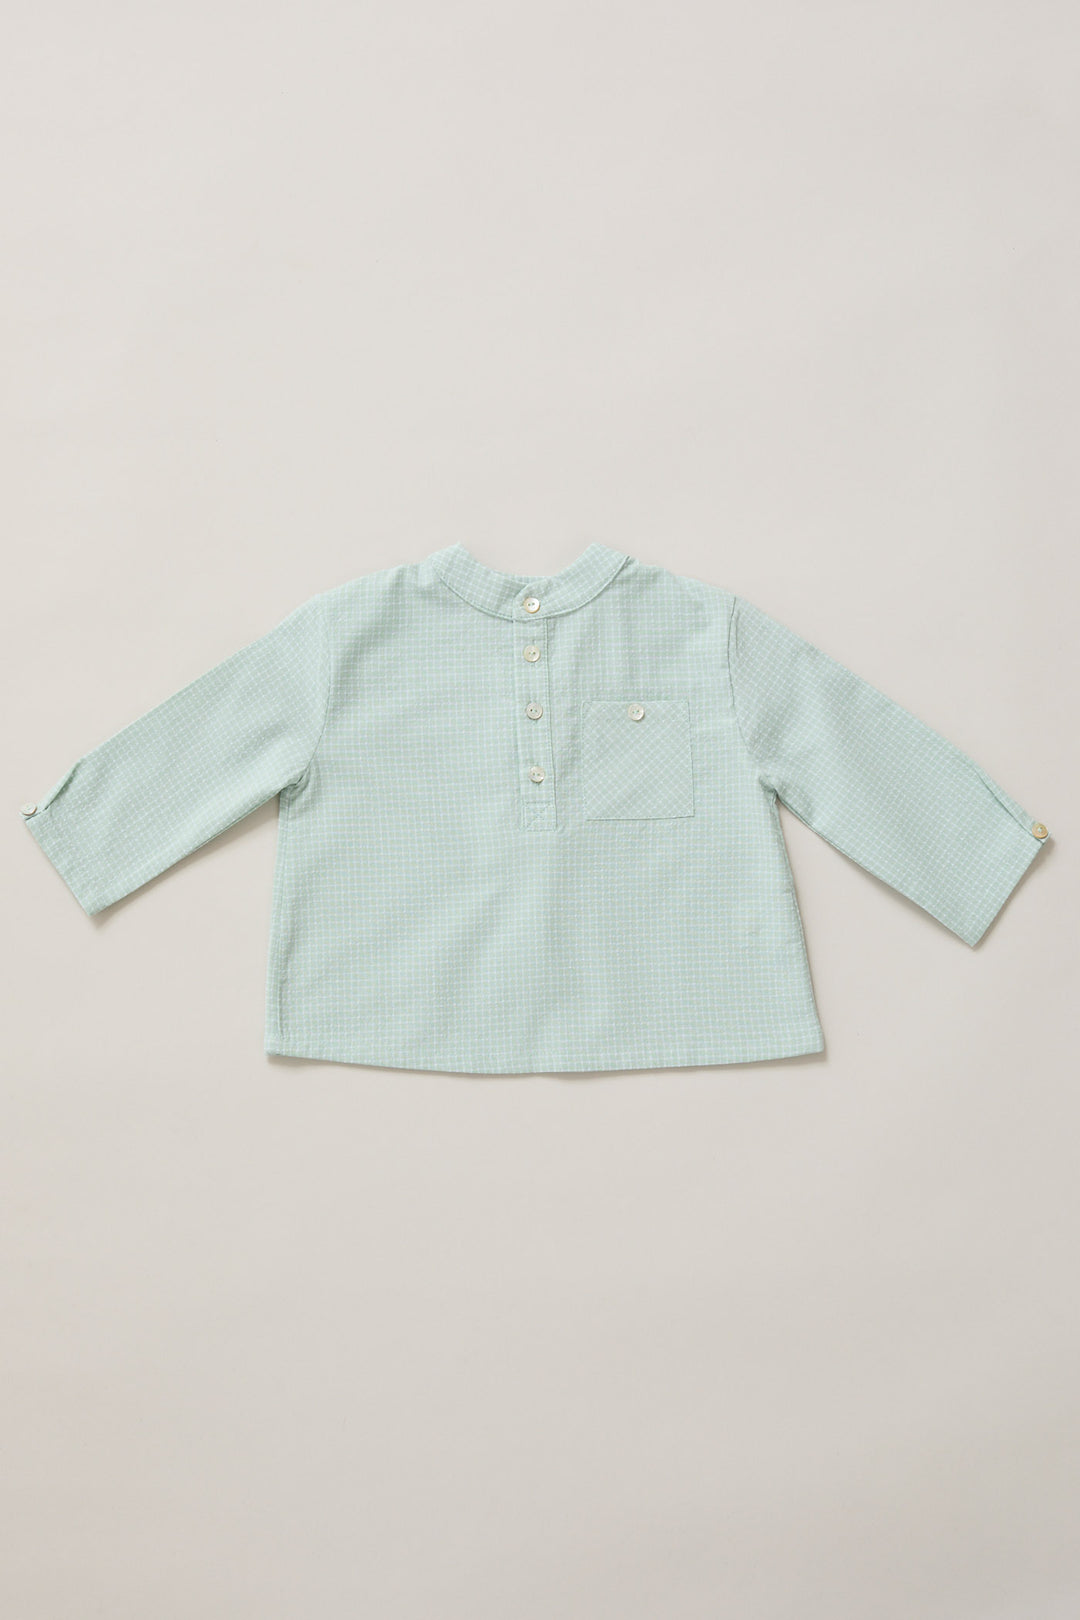 Apple Shirt in Sage Green Check